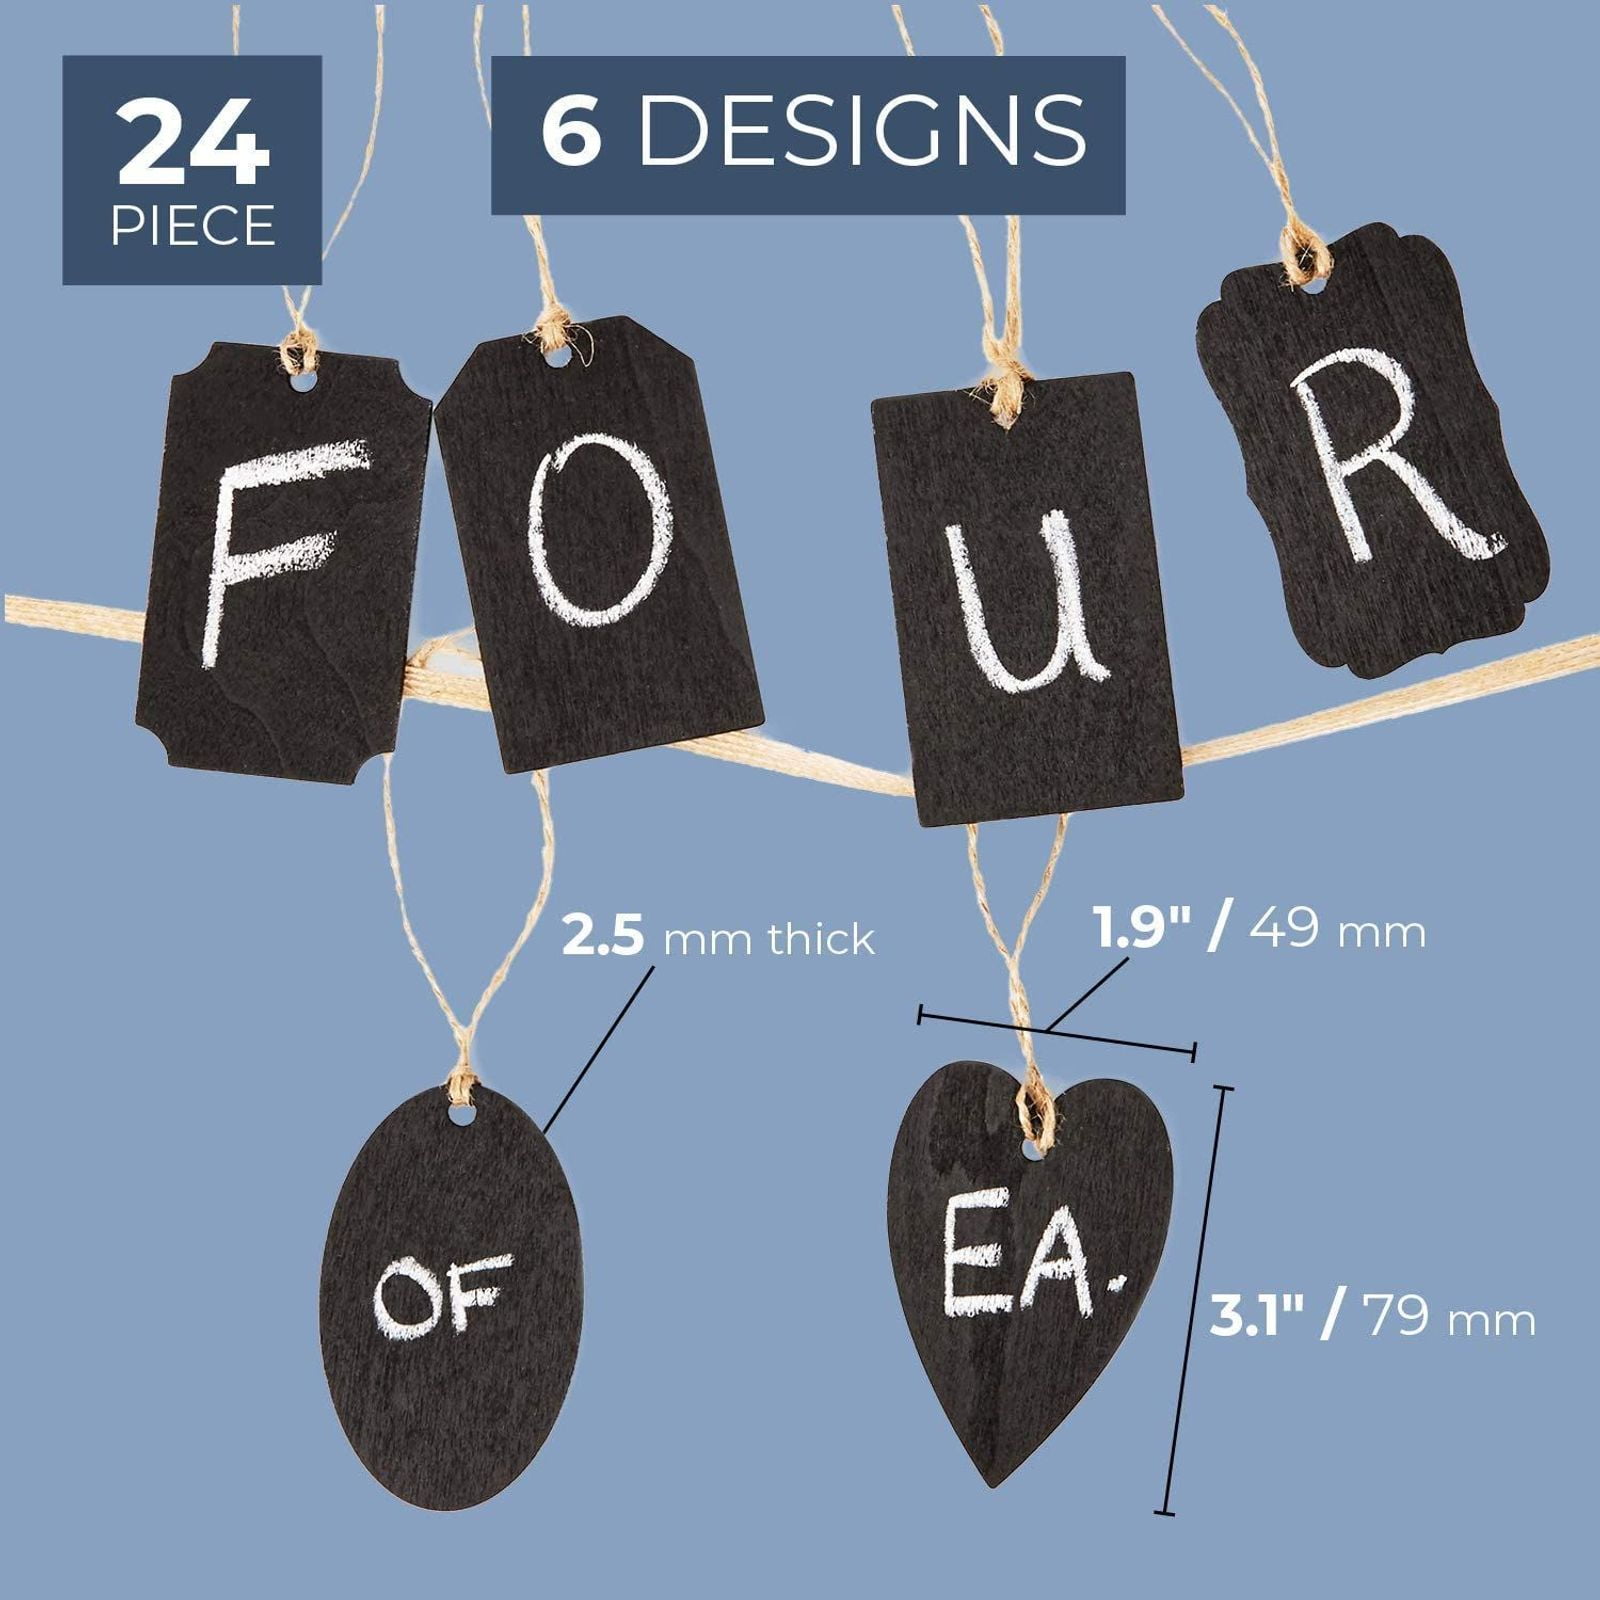 Details about   24pcs Mini Wooden Chalkboard Tag Labels w/String for DIY Crafts Gifts 6 Designs